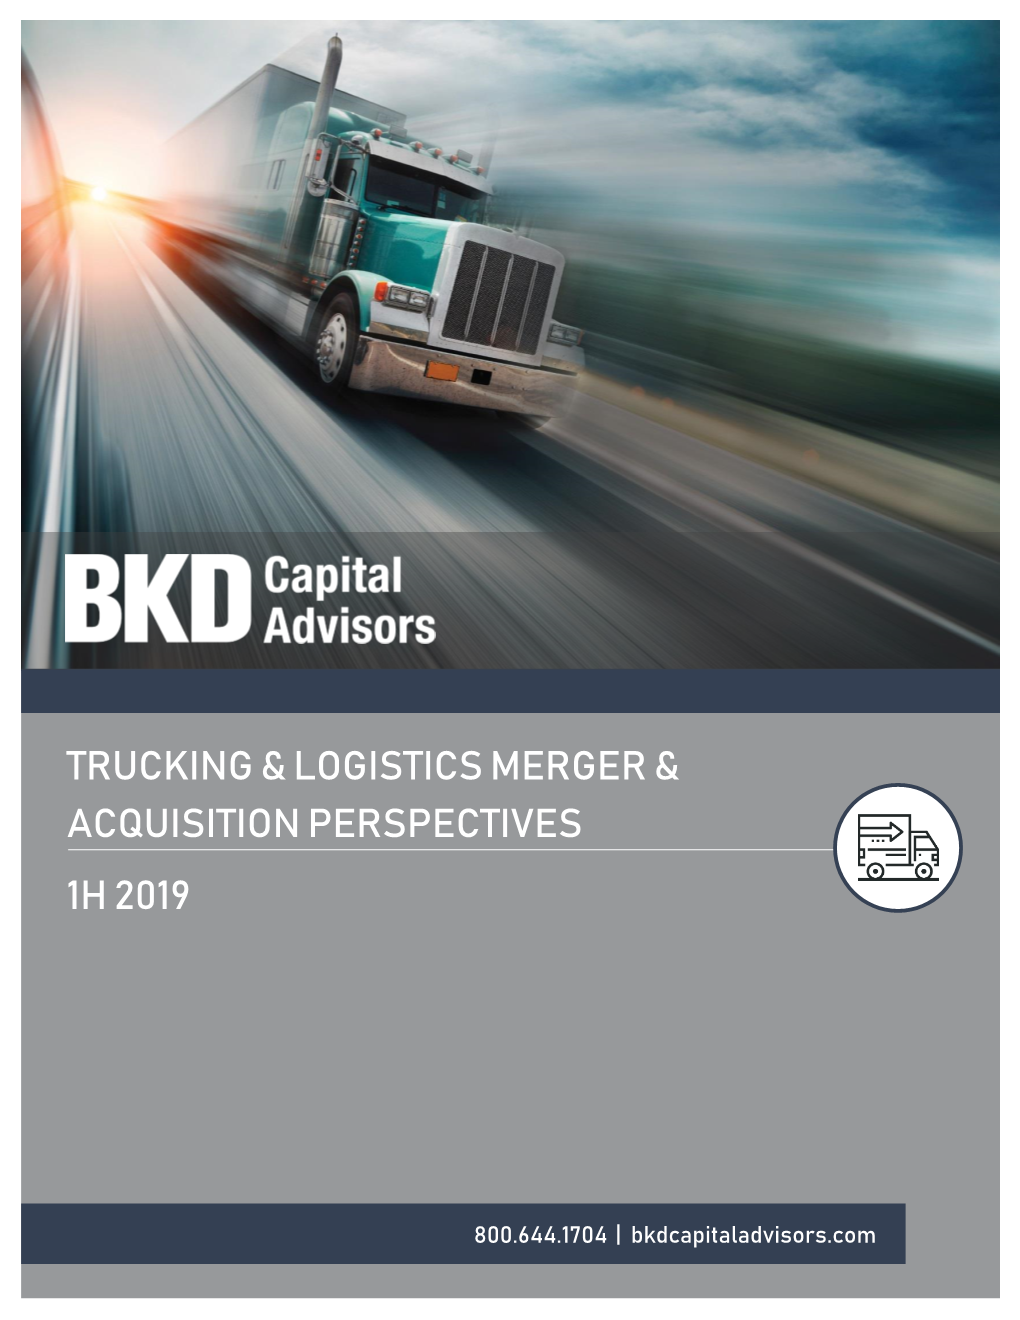 Trucking & Logistics Merger & Acquisition Perspectives 1H 2019